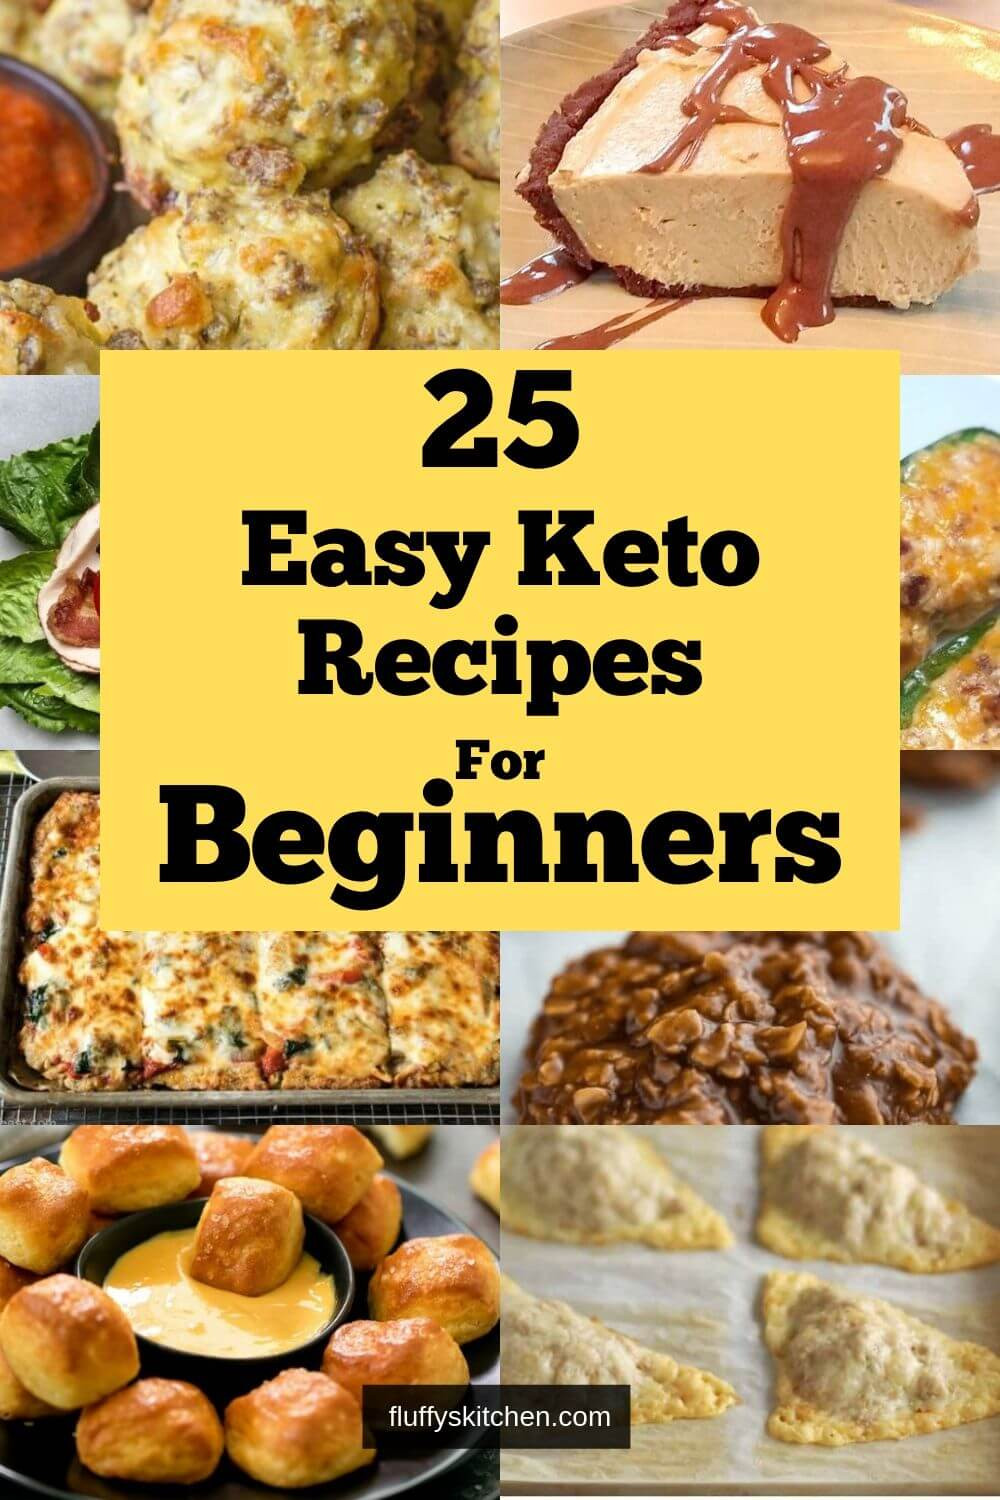 Keto Video Recipes For Beginners
 25 Easy Keto Recipes for Beginners Fluffy s Kitchen